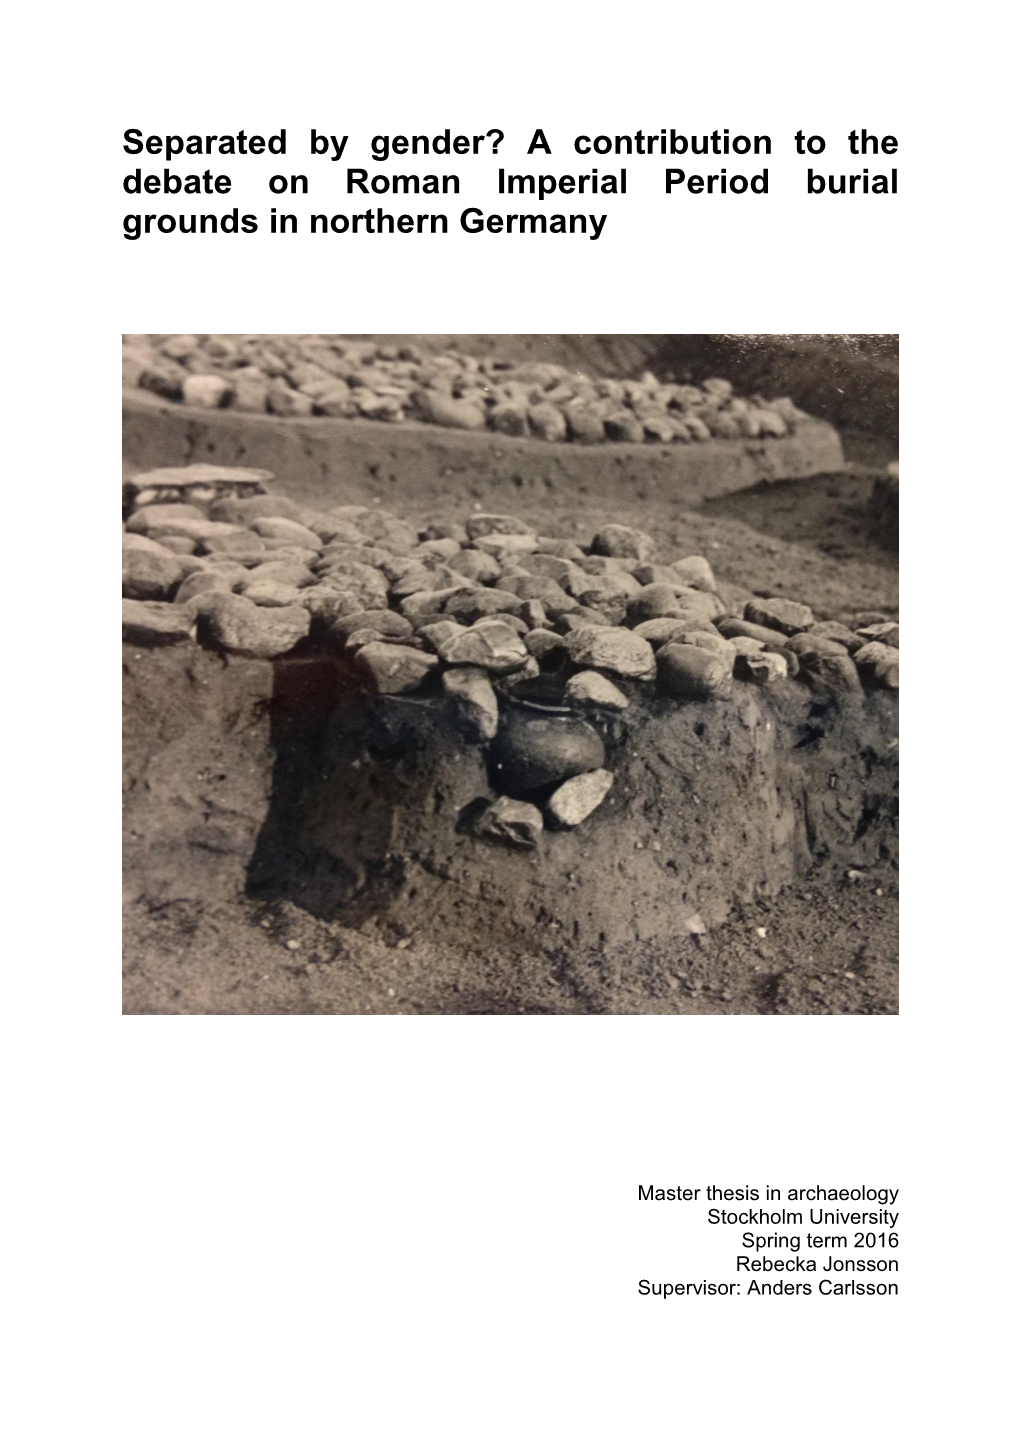 Separated by Gender? a Contribution to the Debate on Roman Imperial Period Burial Grounds in Northern Germany